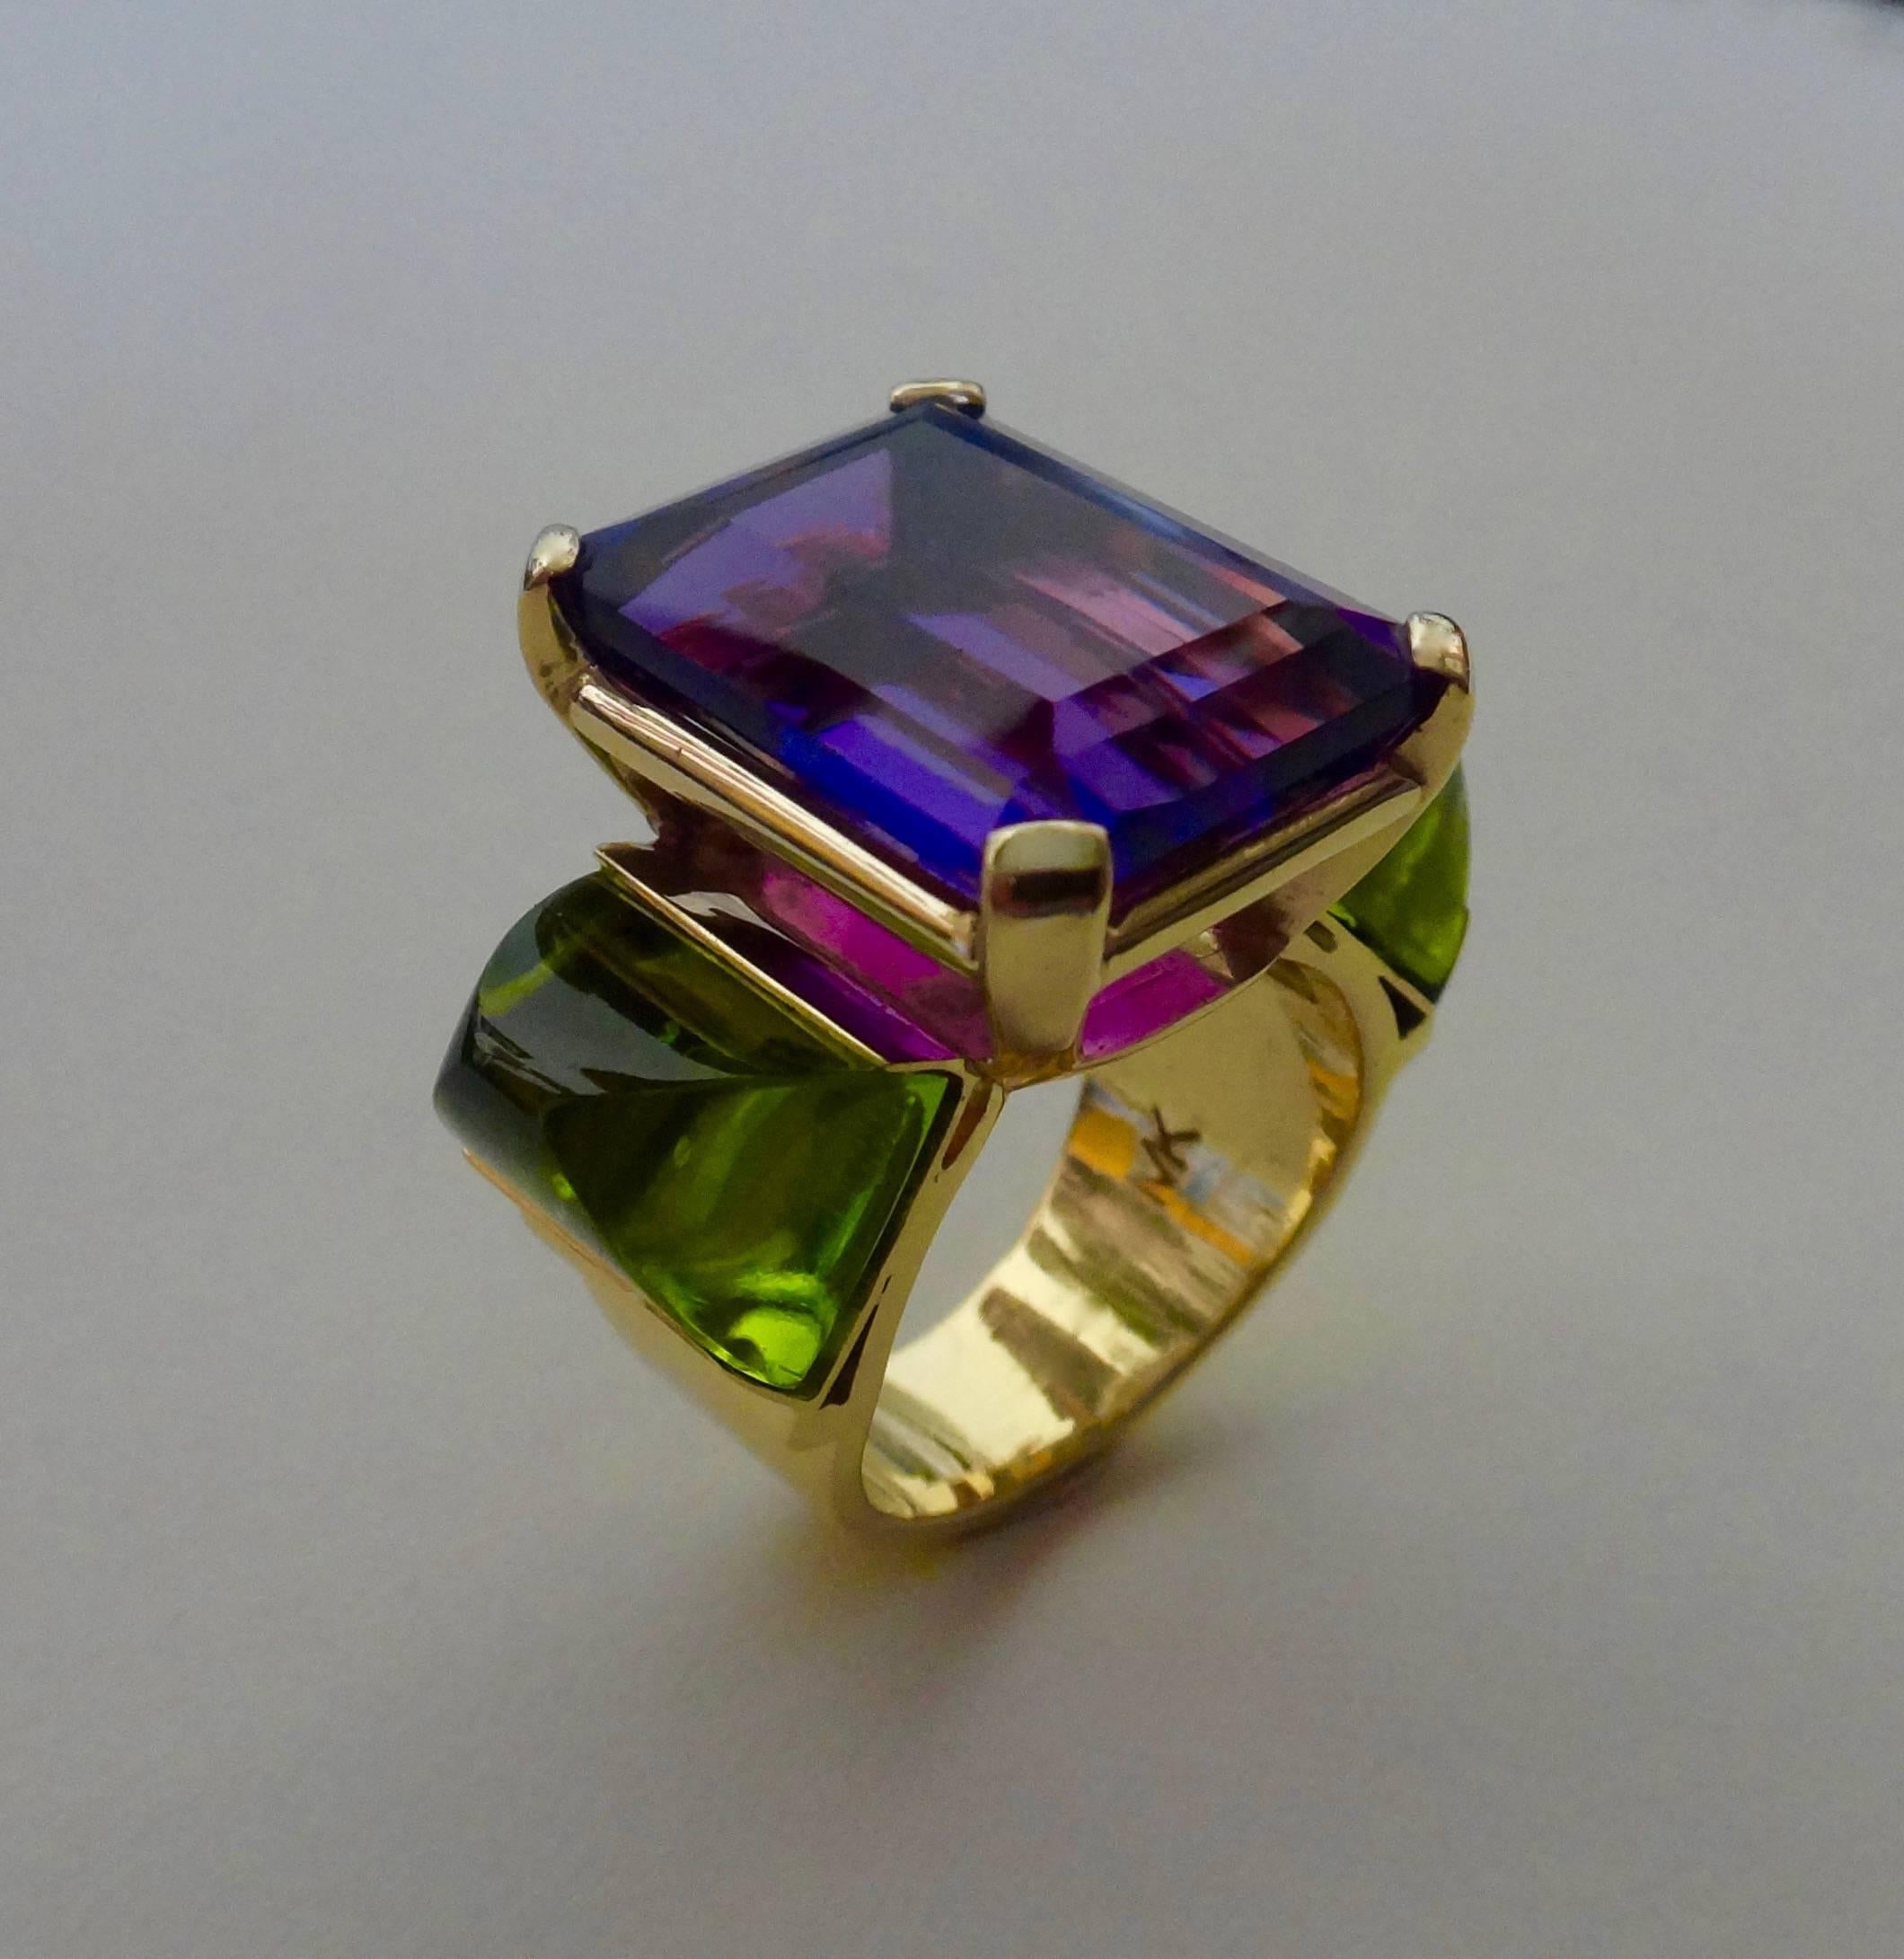 Set in this hand fabricated 18k yellow gold ring is an emerald cut African amethyst flanked by a pair of perfectly matched, sugarloaf cabochon peridots cut in Idar Oberstein, Germany.  This ring is perfect for someone with a knuckle problem as the